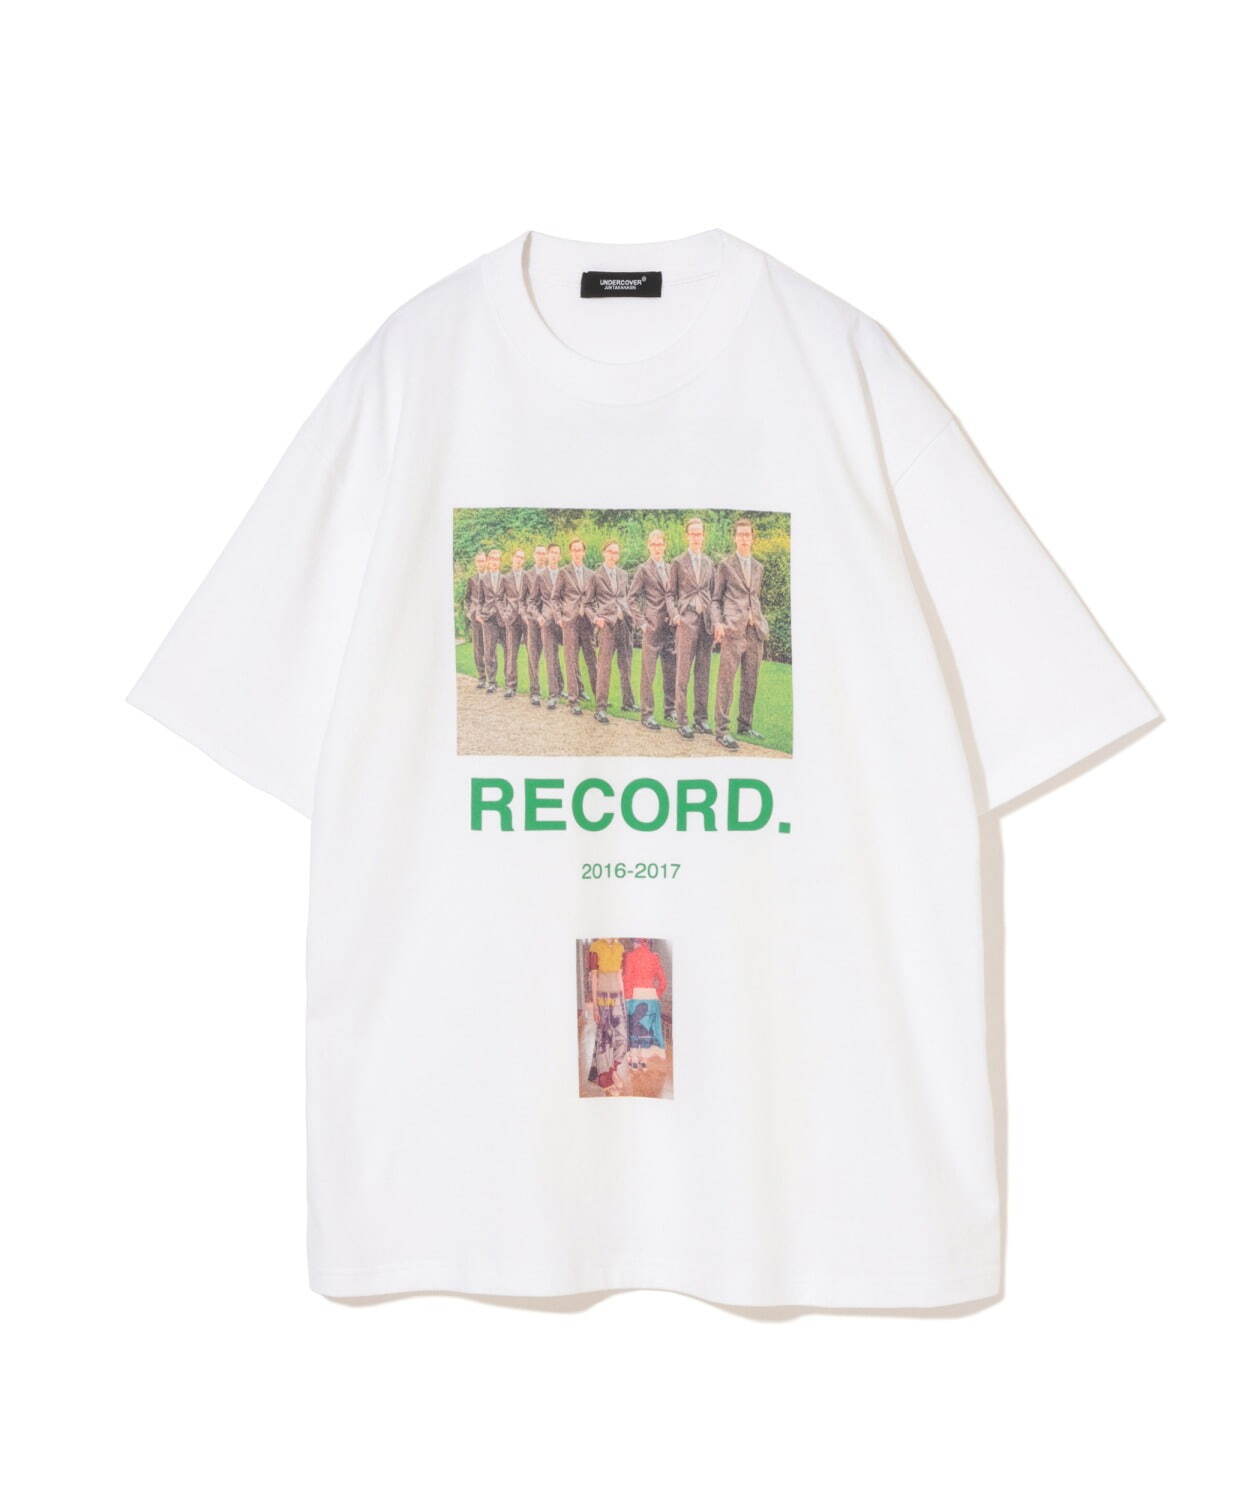 UNDERCOVER 伊勢丹イベント限定 Tシャツ | kensysgas.com